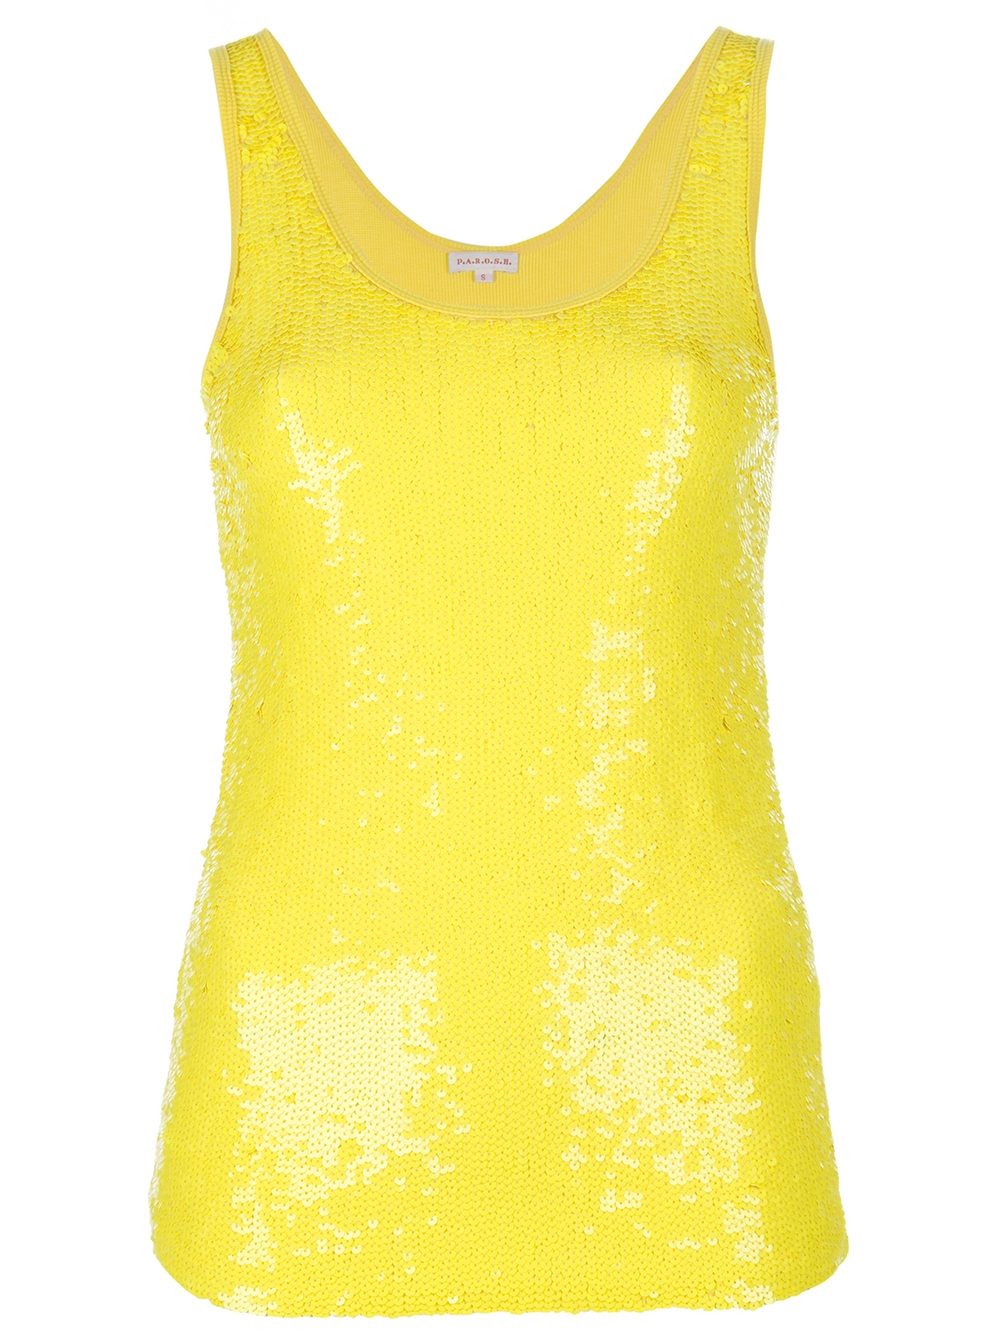 P.A.R.O.S.H. Sequin Tank Top in Yellow & Orange (Yellow) - Lyst